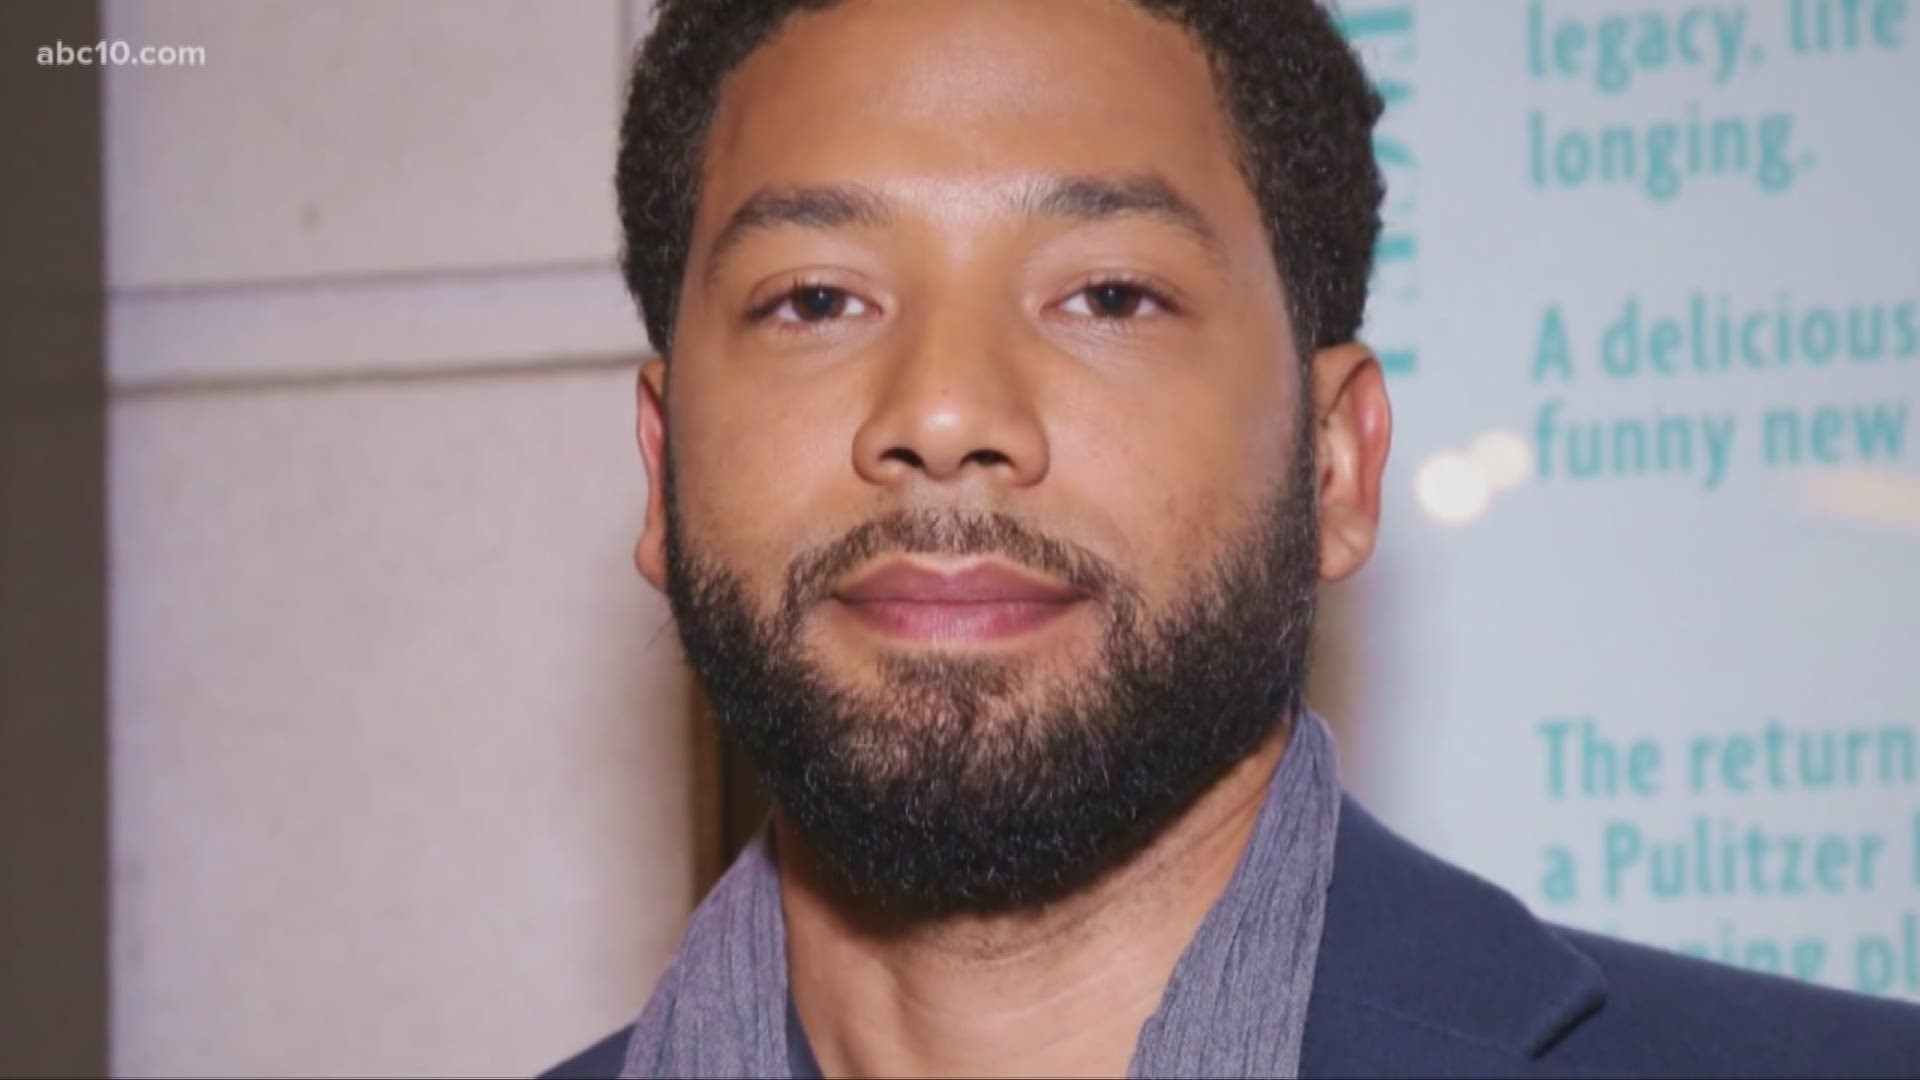 Jussie Smollett was arrested in Chicago Thursday morning for allegedly staging an assault. Ariane Datil has more on what's trending.